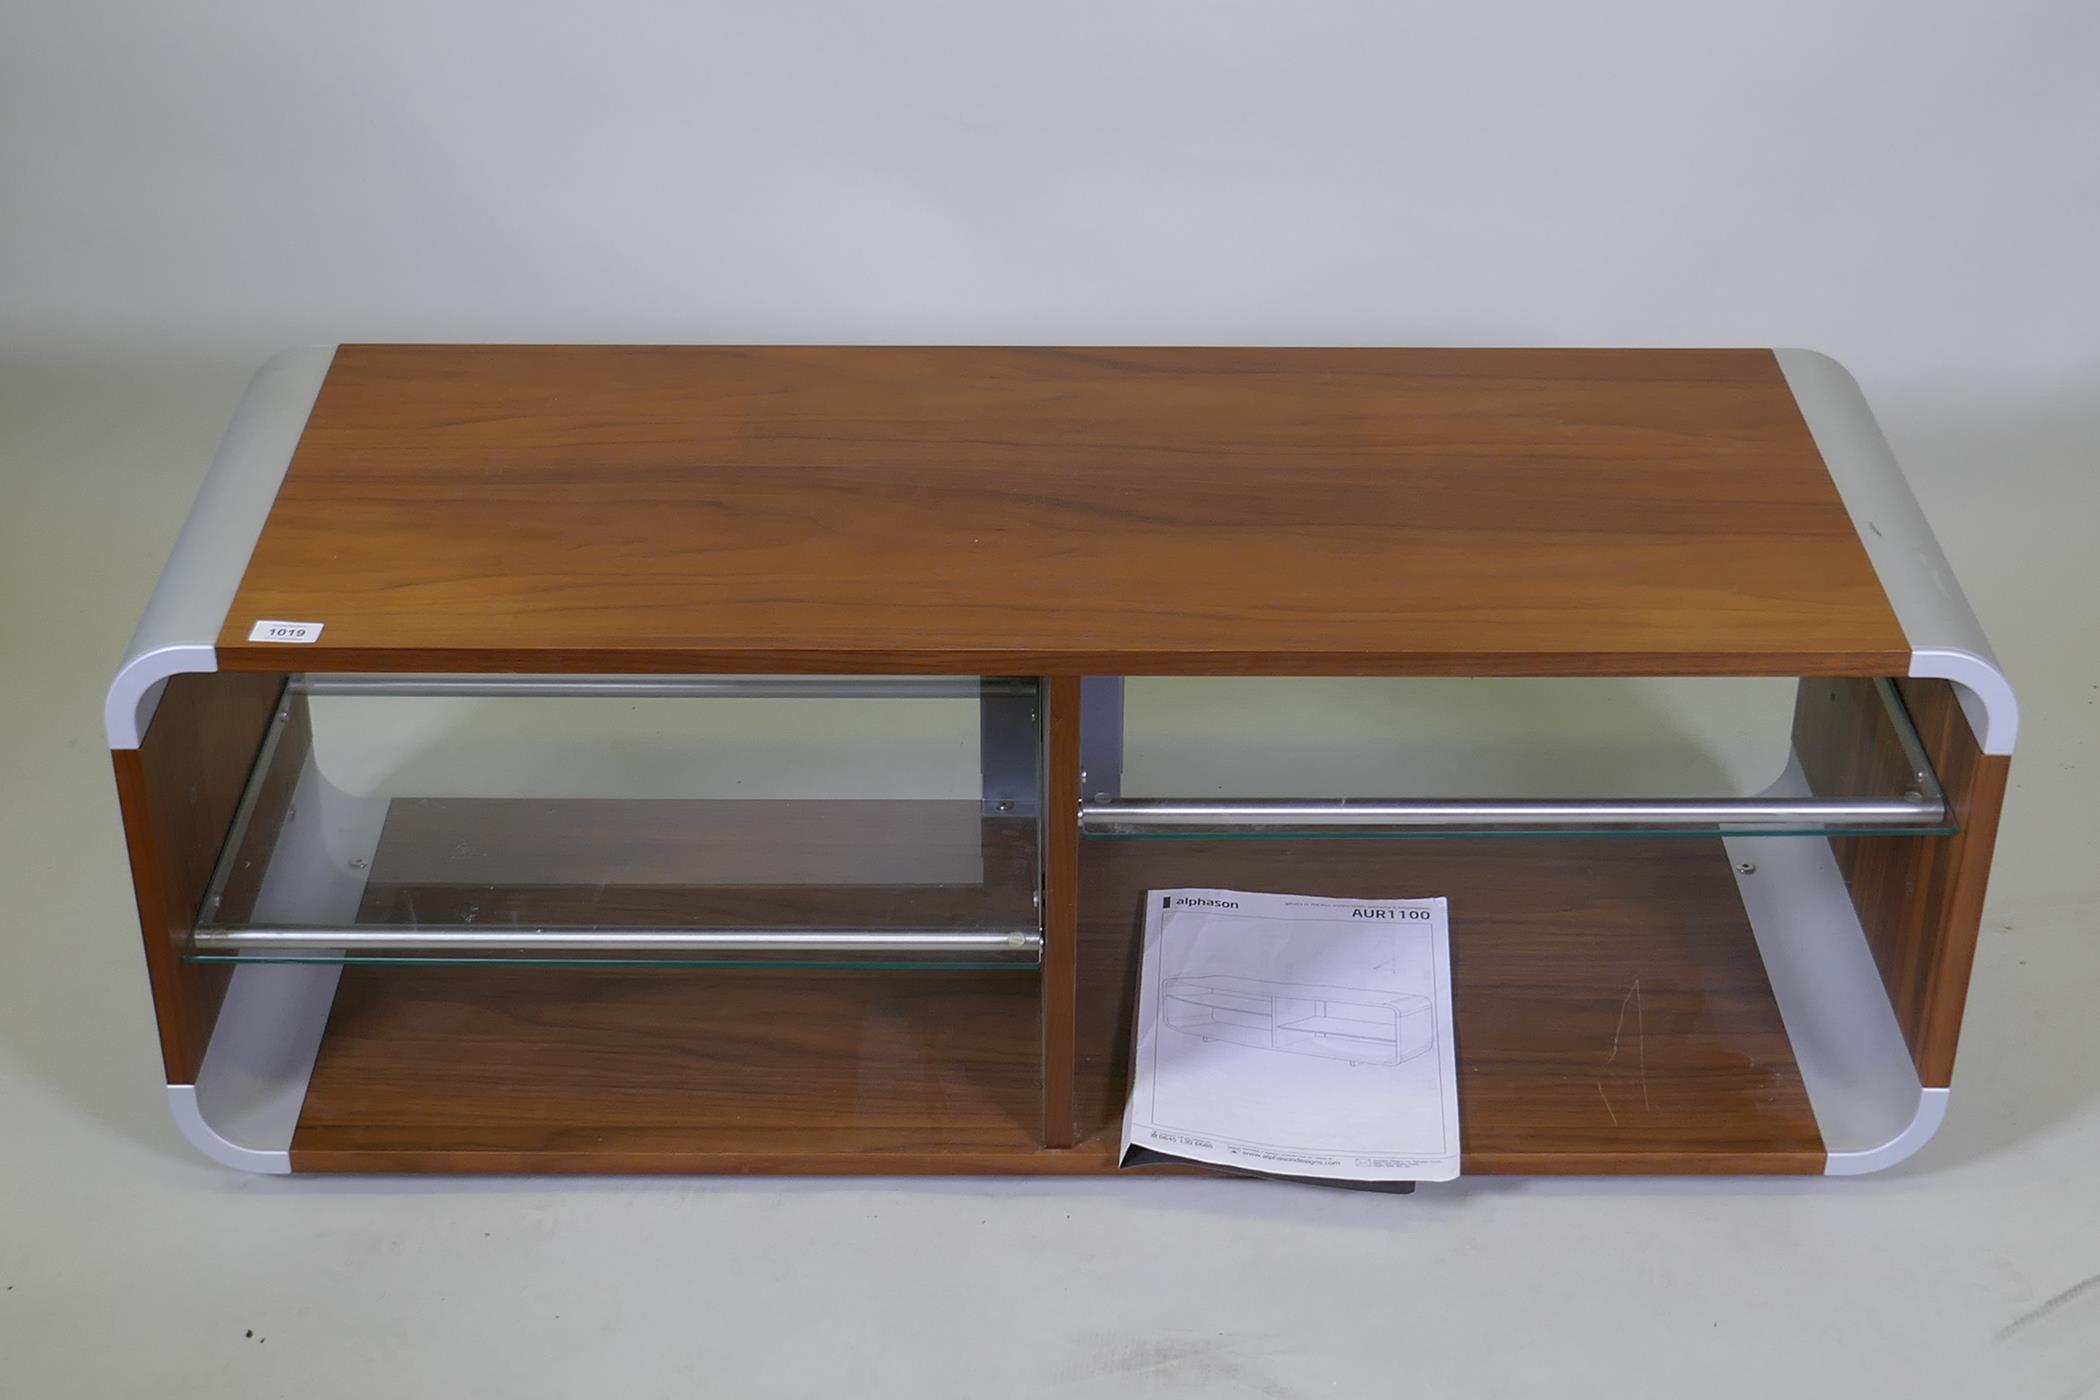 An Alphason wood and metal mounted TV stand, with glass shelves, 110 x 40 x 40cm - Image 2 of 4